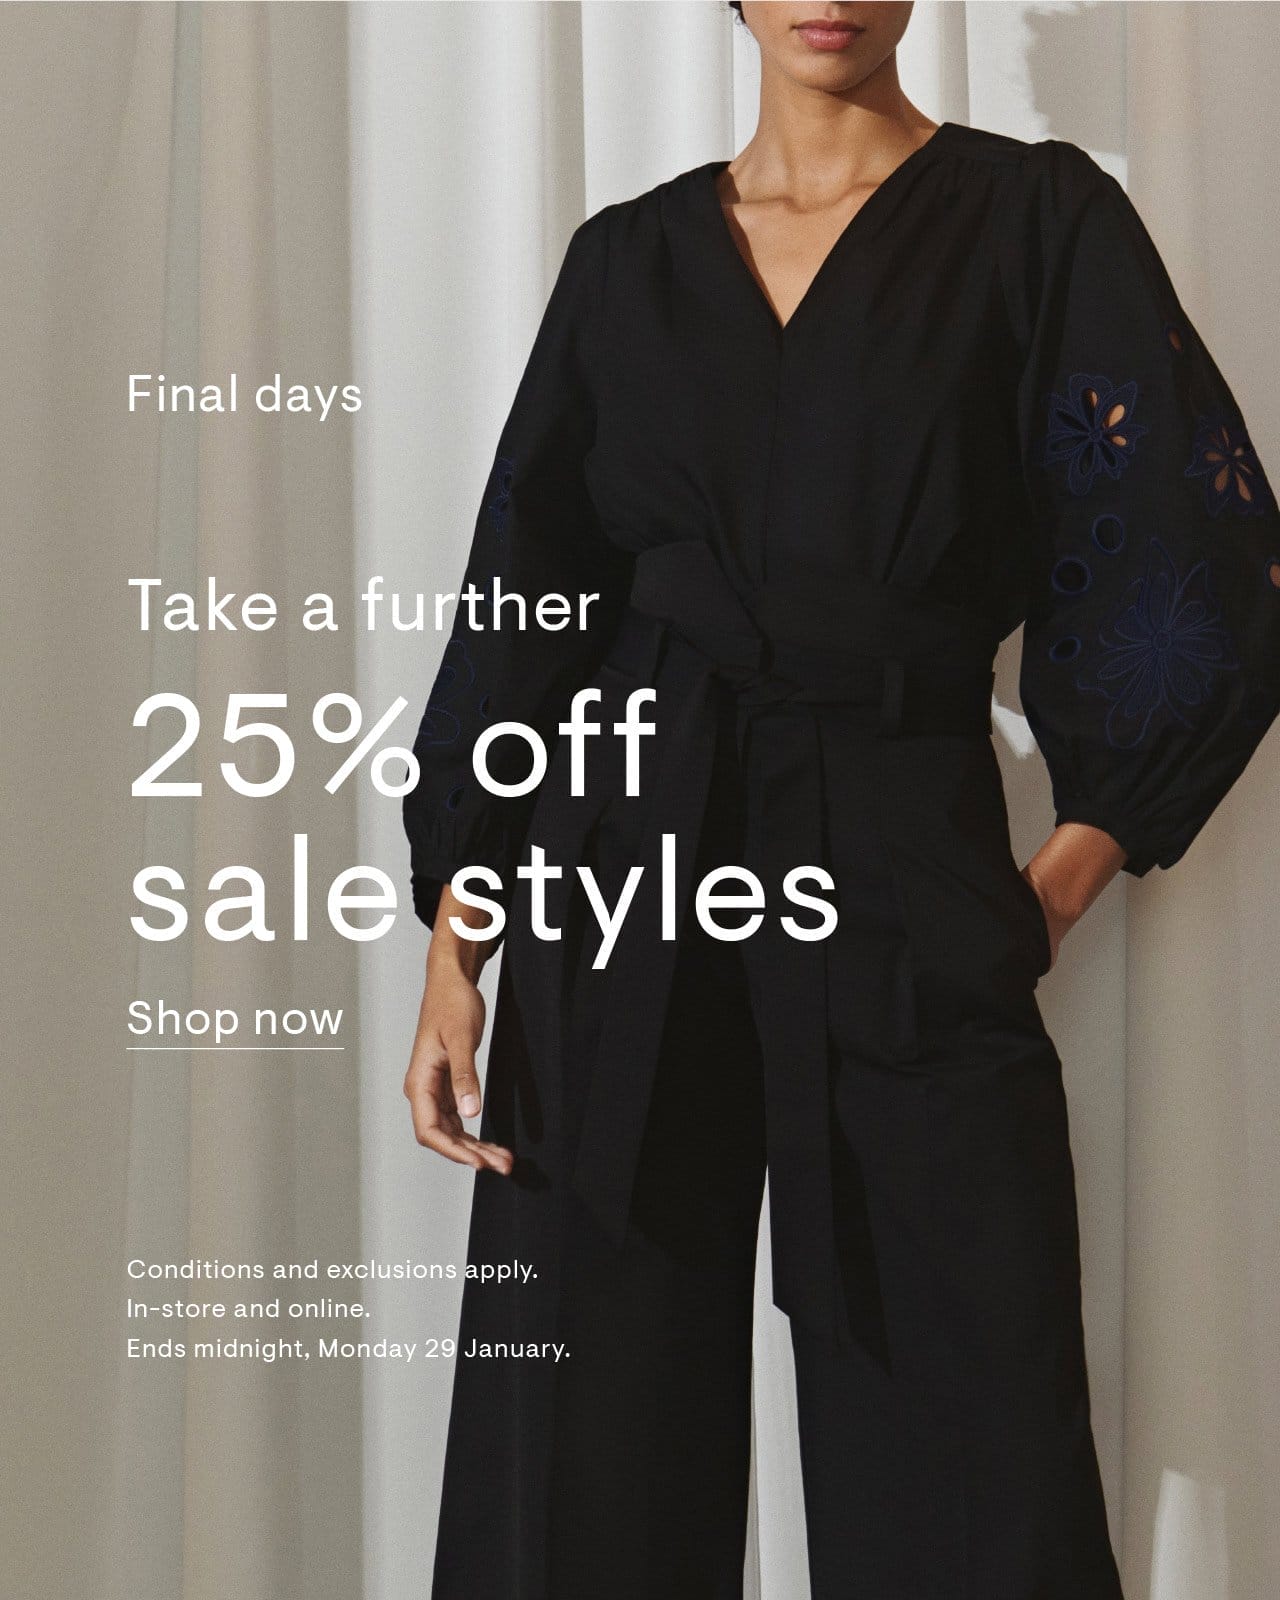 Take a further 25% off sale